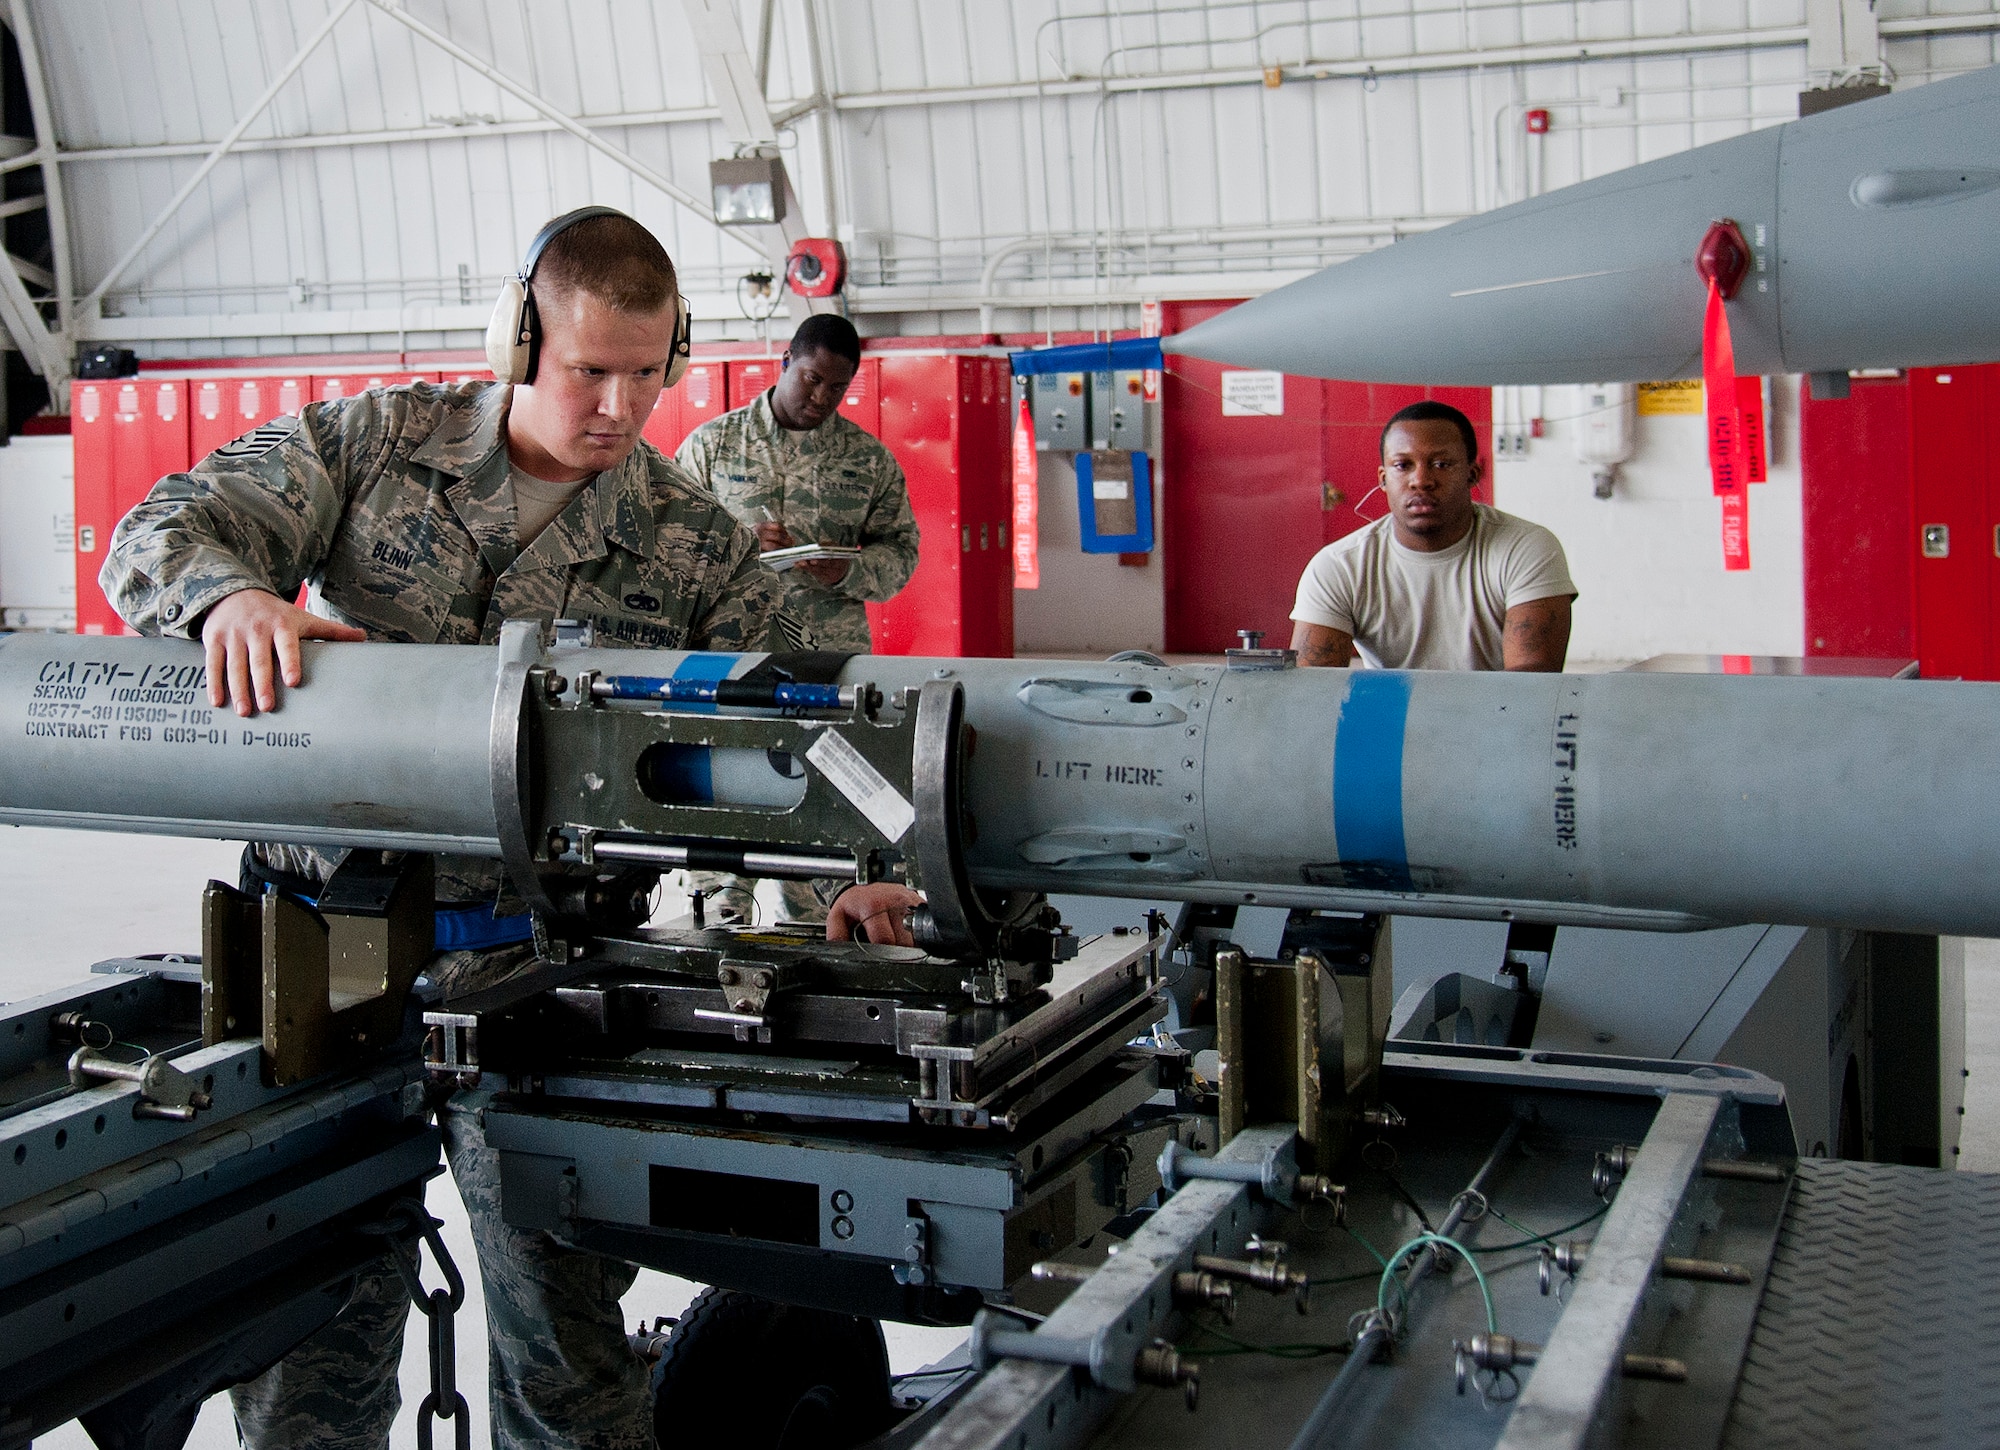 Staff Sgt. Mark Blinn, of the 96th Aircraft Maintenance Squadron Blue, secures an AIM-120 missile for loading onto the F-16 Fighting Falcon, during the 96th Maintenance Group’s quarterly weapons load crew competition Sept. 26 at Eglin Air Force Base, Fla. Blinn, Airmen 1st Class Frederick Guaren and Troy Carpenter made up the Blue team who won the competition. (U.S. Air Force photo/Chrissy Cuttita)